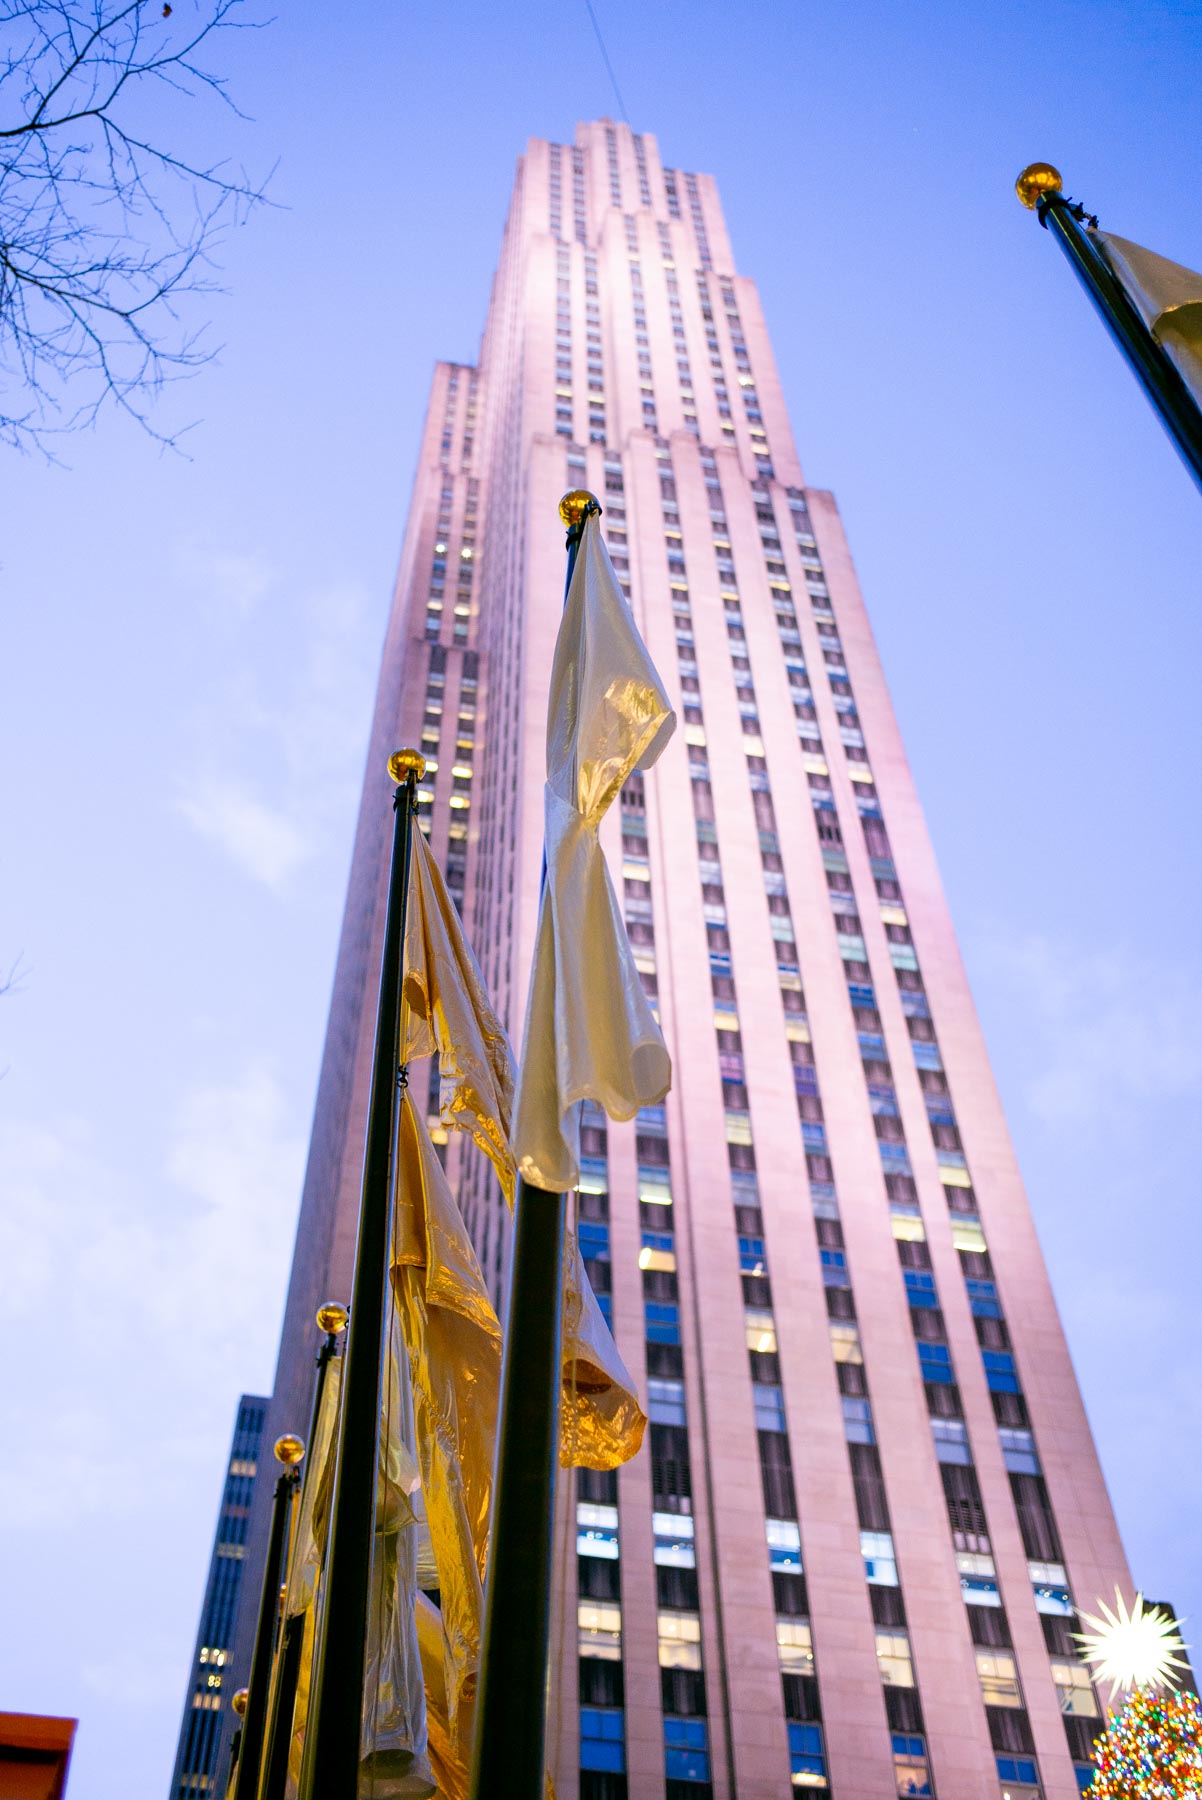 Rockefeller Plaza, 30 Rock Building with a flag pole and gold flags attached 